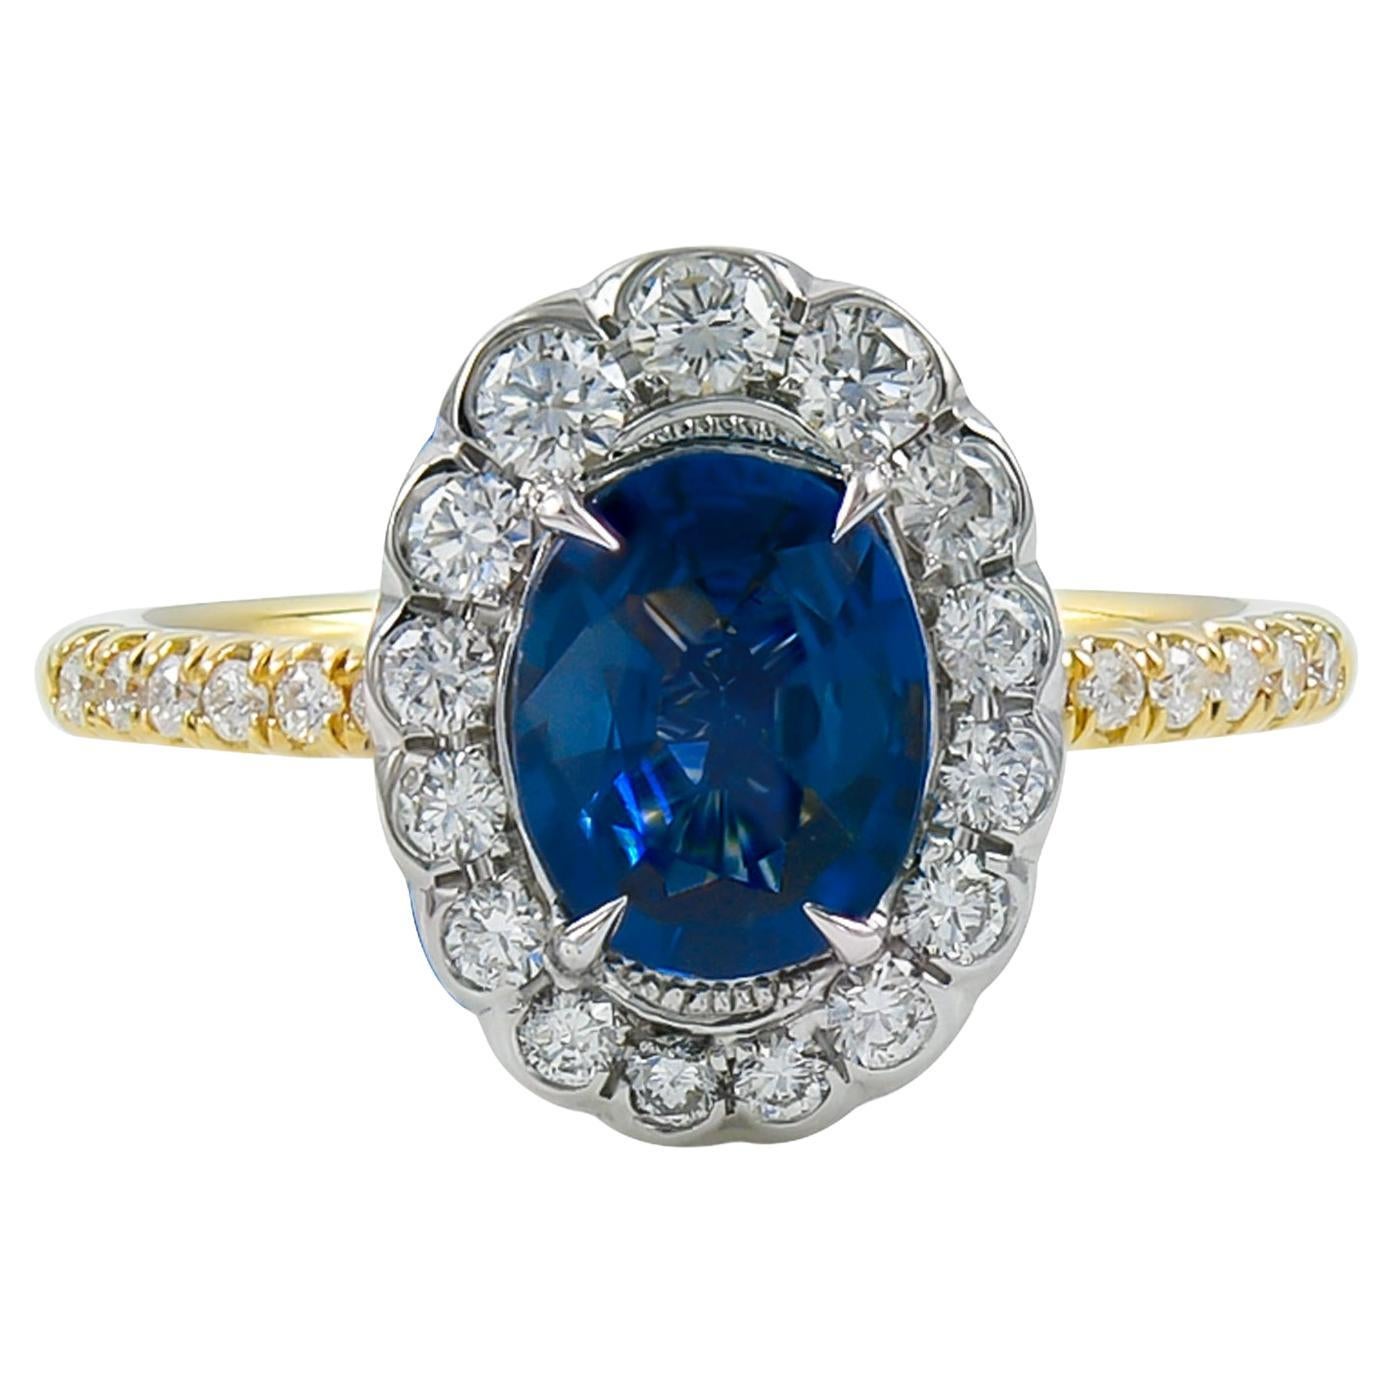 Spectra Fine Jewelry 1.42 Carat Sapphire Diamond Cocktail Ring For Sale